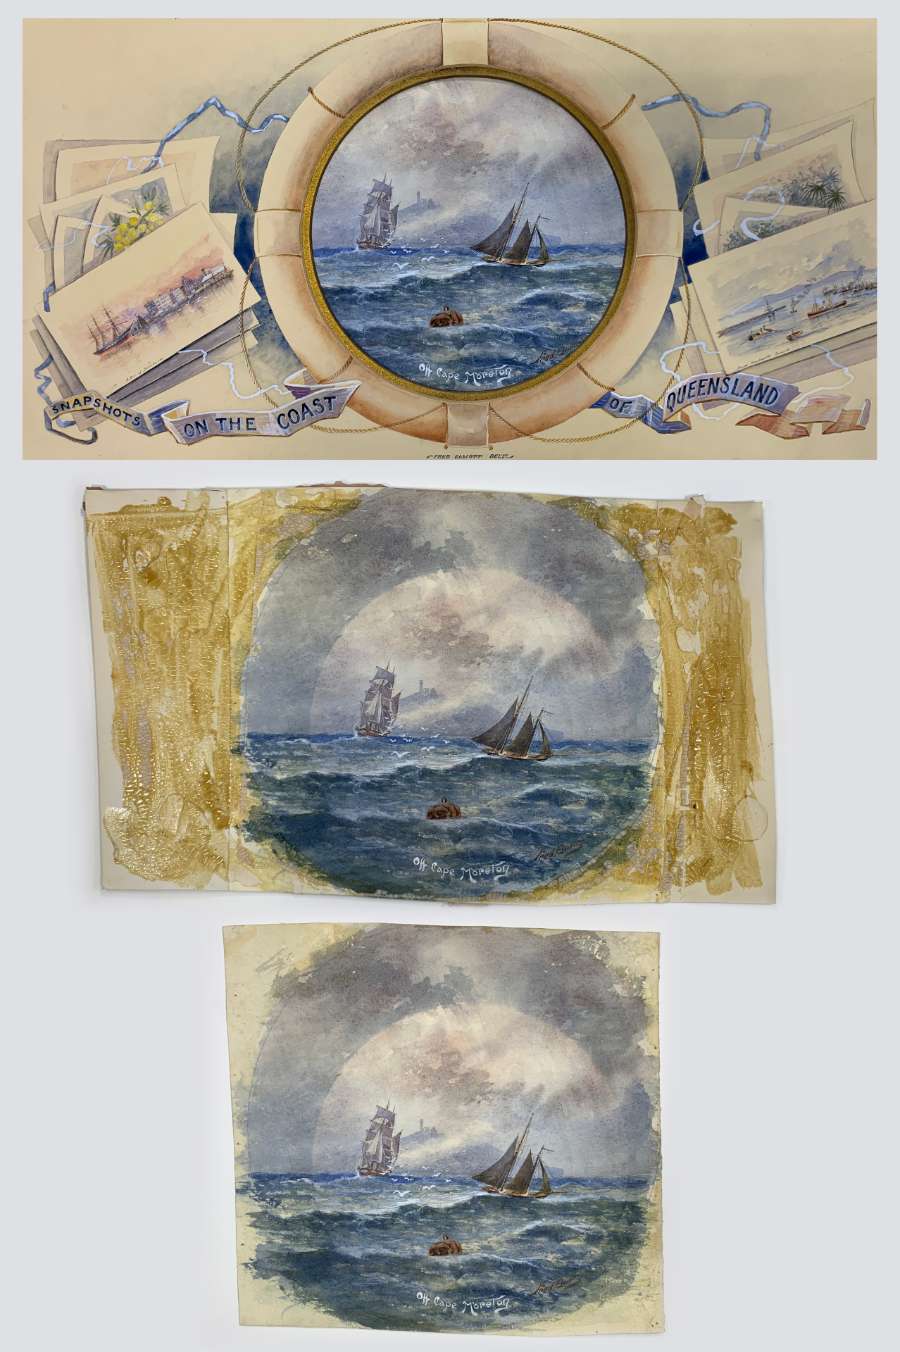 Large, central circular watercolour ‘Off Cape Moreton’ before separation from the mount. Second images shows it after separation revealing a huge backing board, more of the watercolour and A LOT of yellowed animal glue! Final image shows the watercolour after adhesive removal and backing removal – it is so much happier now!